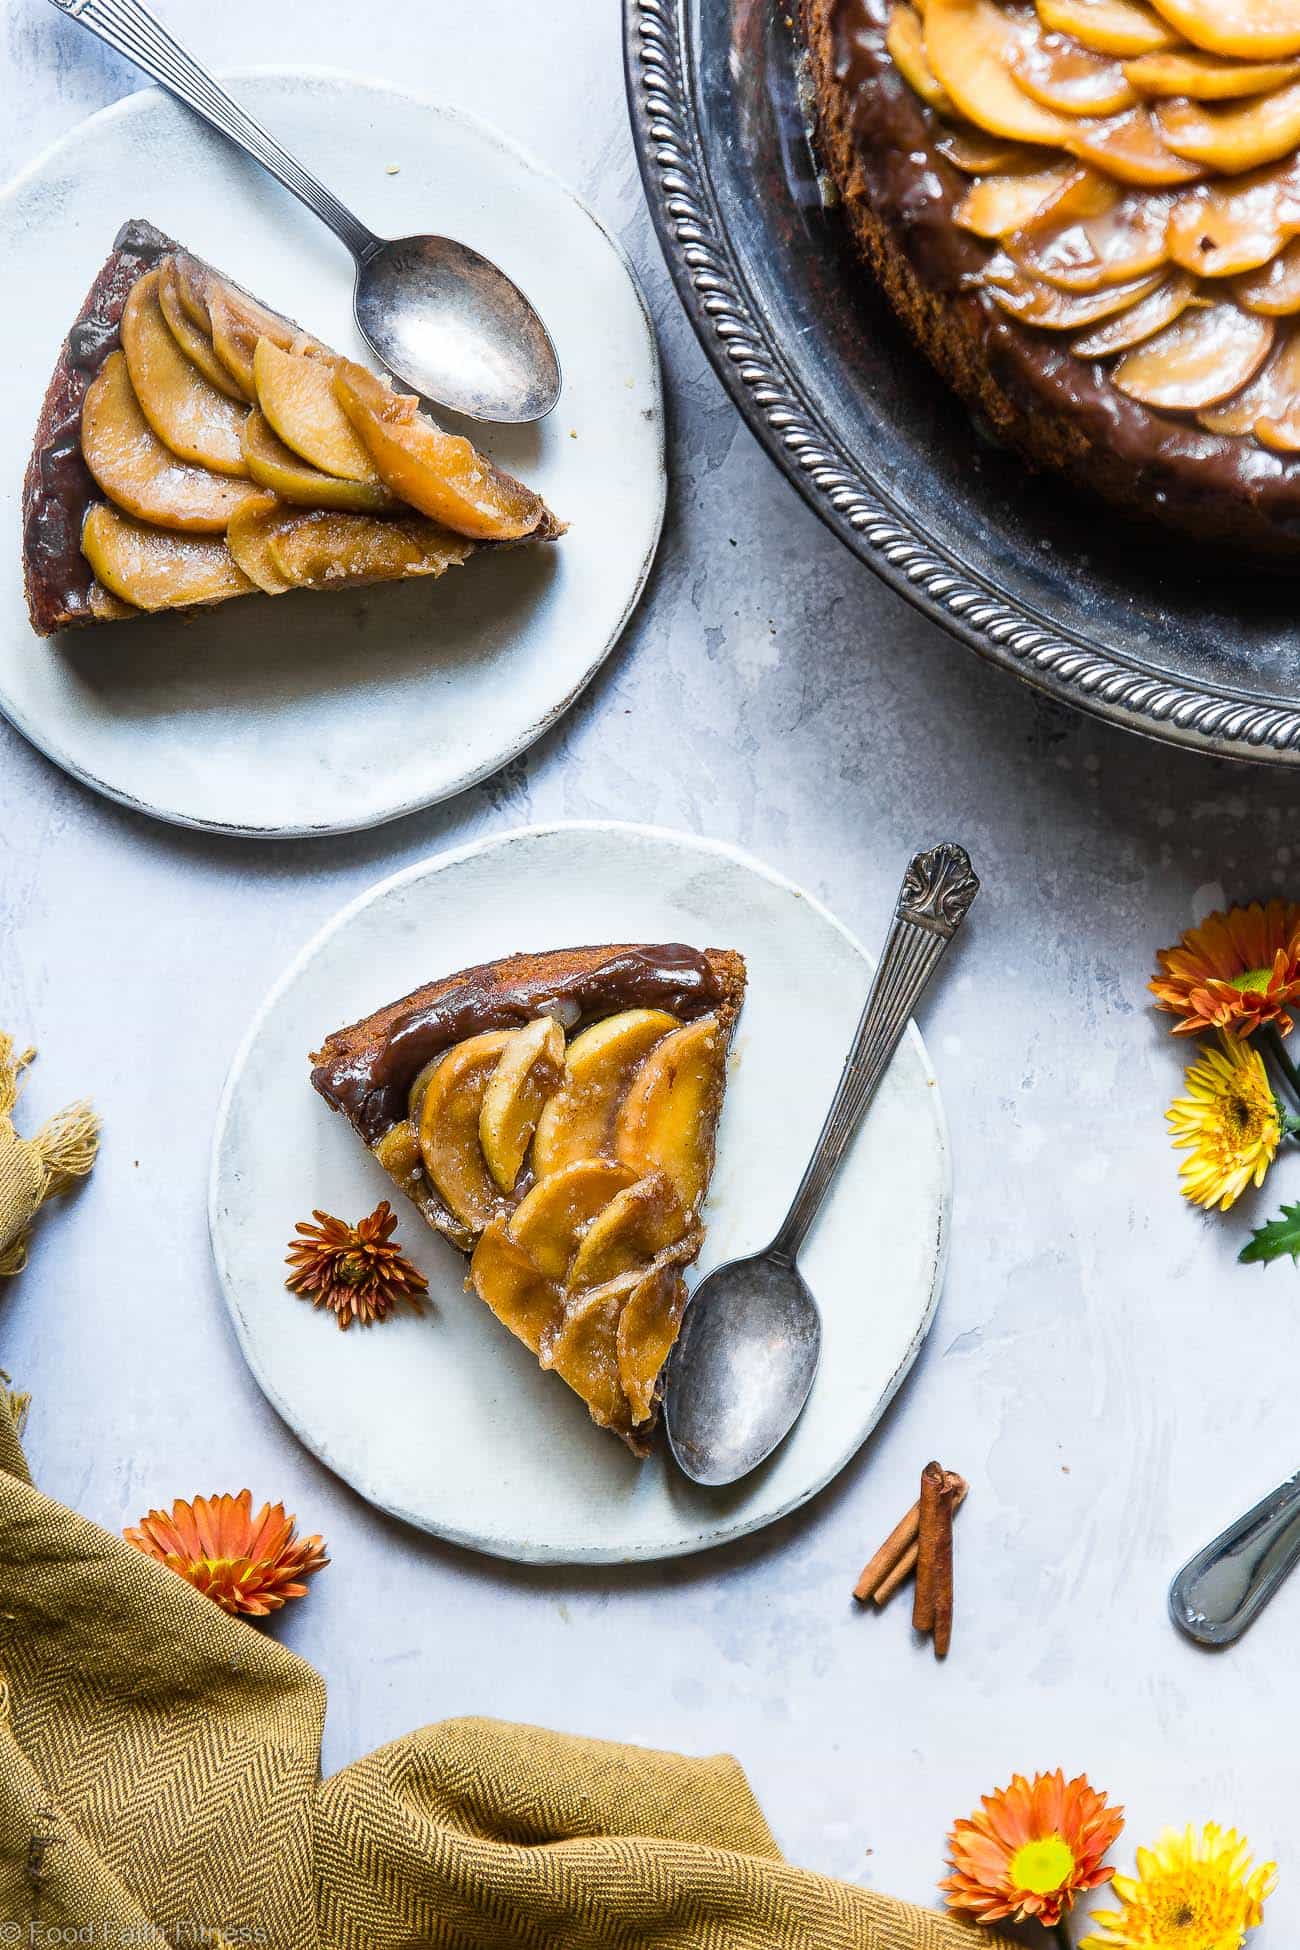 Paleo Caramel Apple Cheesecake - You will never believe this creamy caramel apple paleo cheesecake is vegan friendly and gluten, grain and dairy free! The perfect healthy comfort food dessert for the fall! | Foodfaithfitness.com | @FoodFaithFit